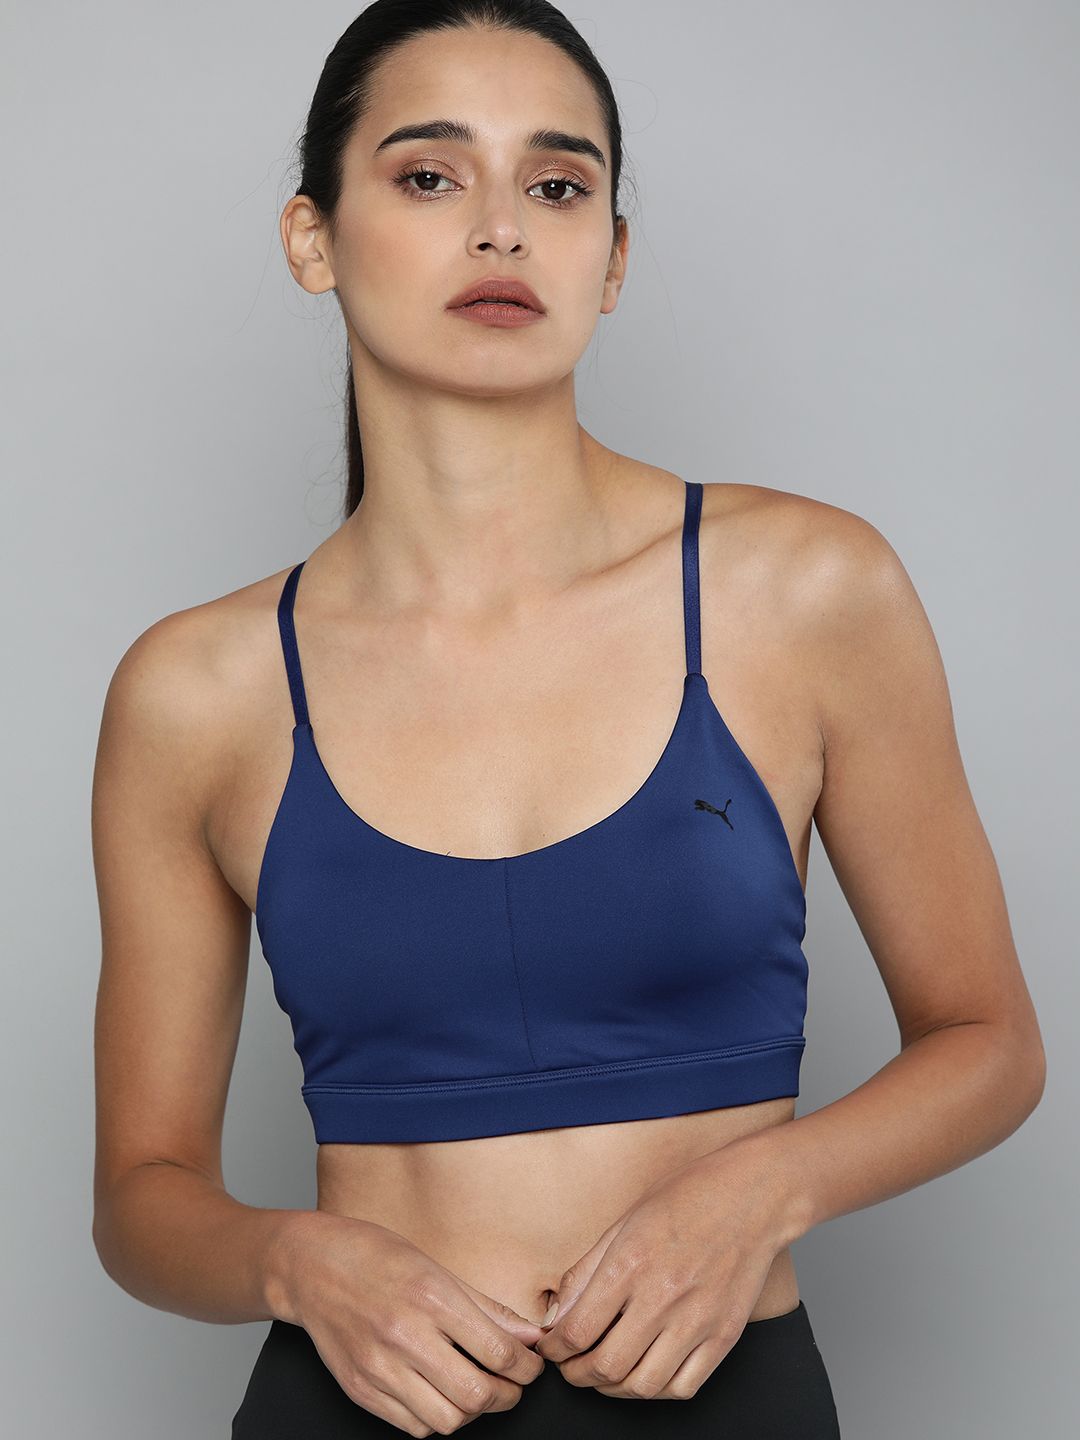 Puma Navy Blue Solid Non-Wired Lightly Padded Low Impact Strappy Training Bra Price in India